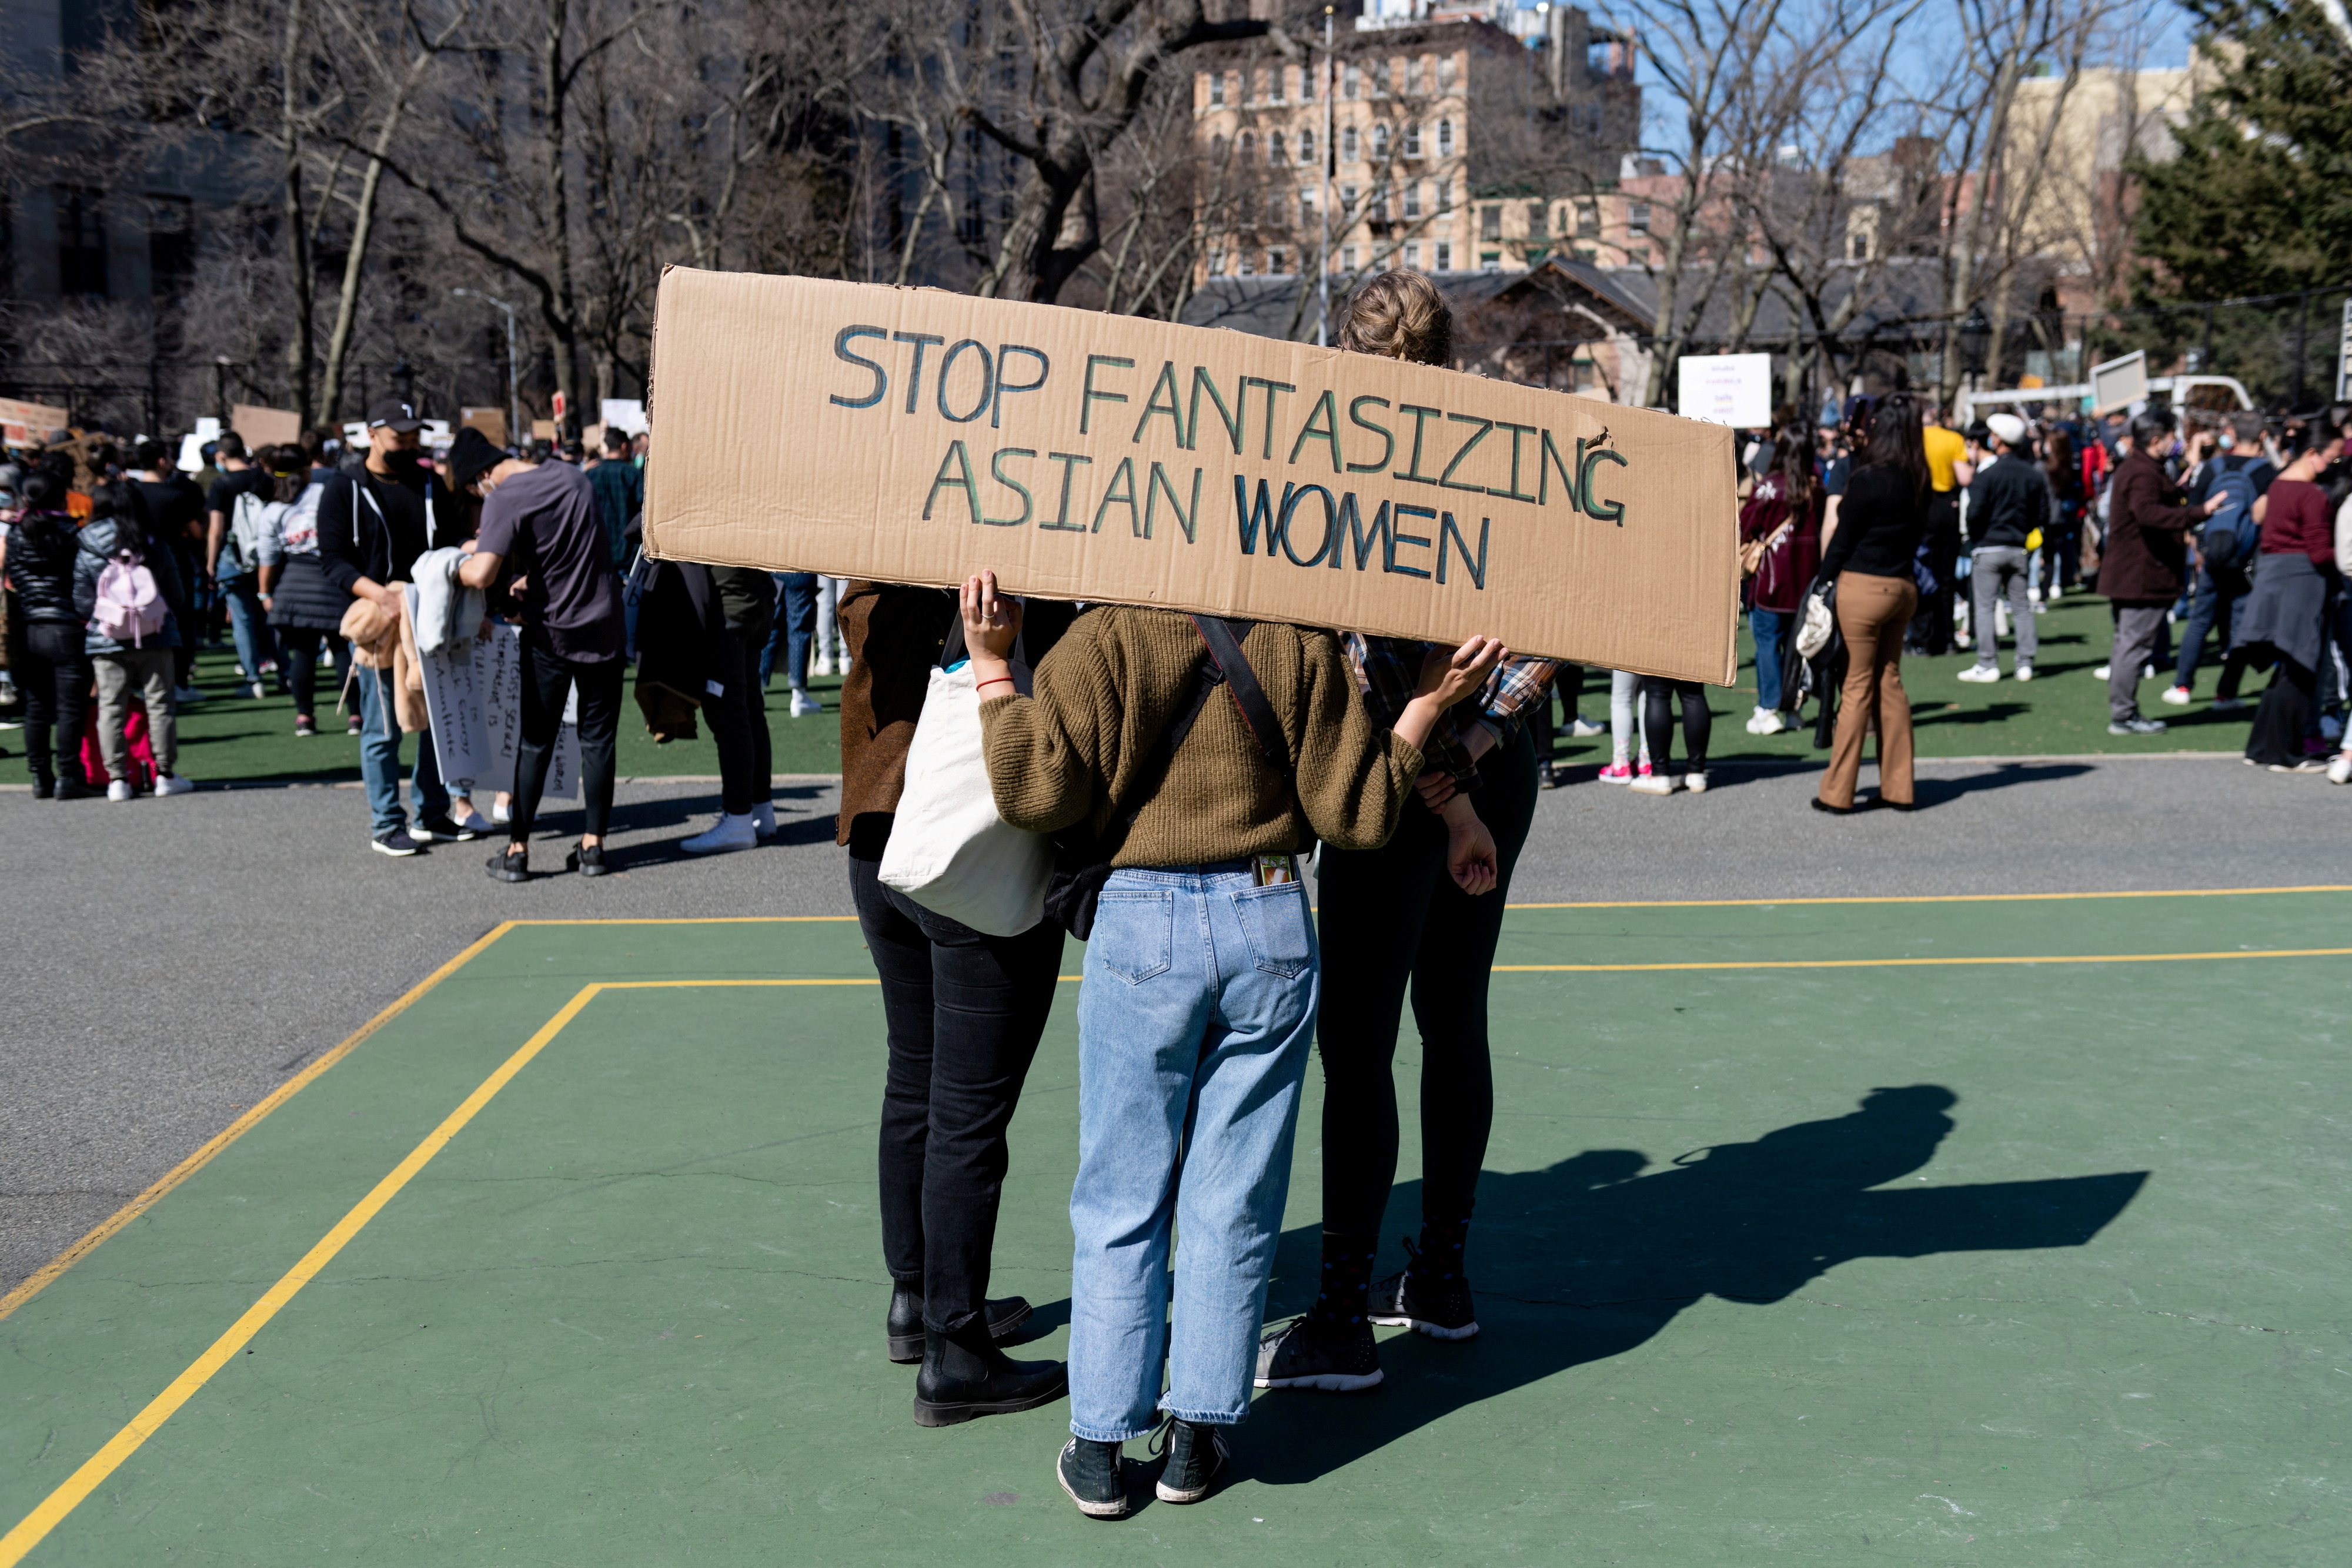 Rally Against Hate to end discrimination against Asian Americans and Pacific Islanders, in New York City